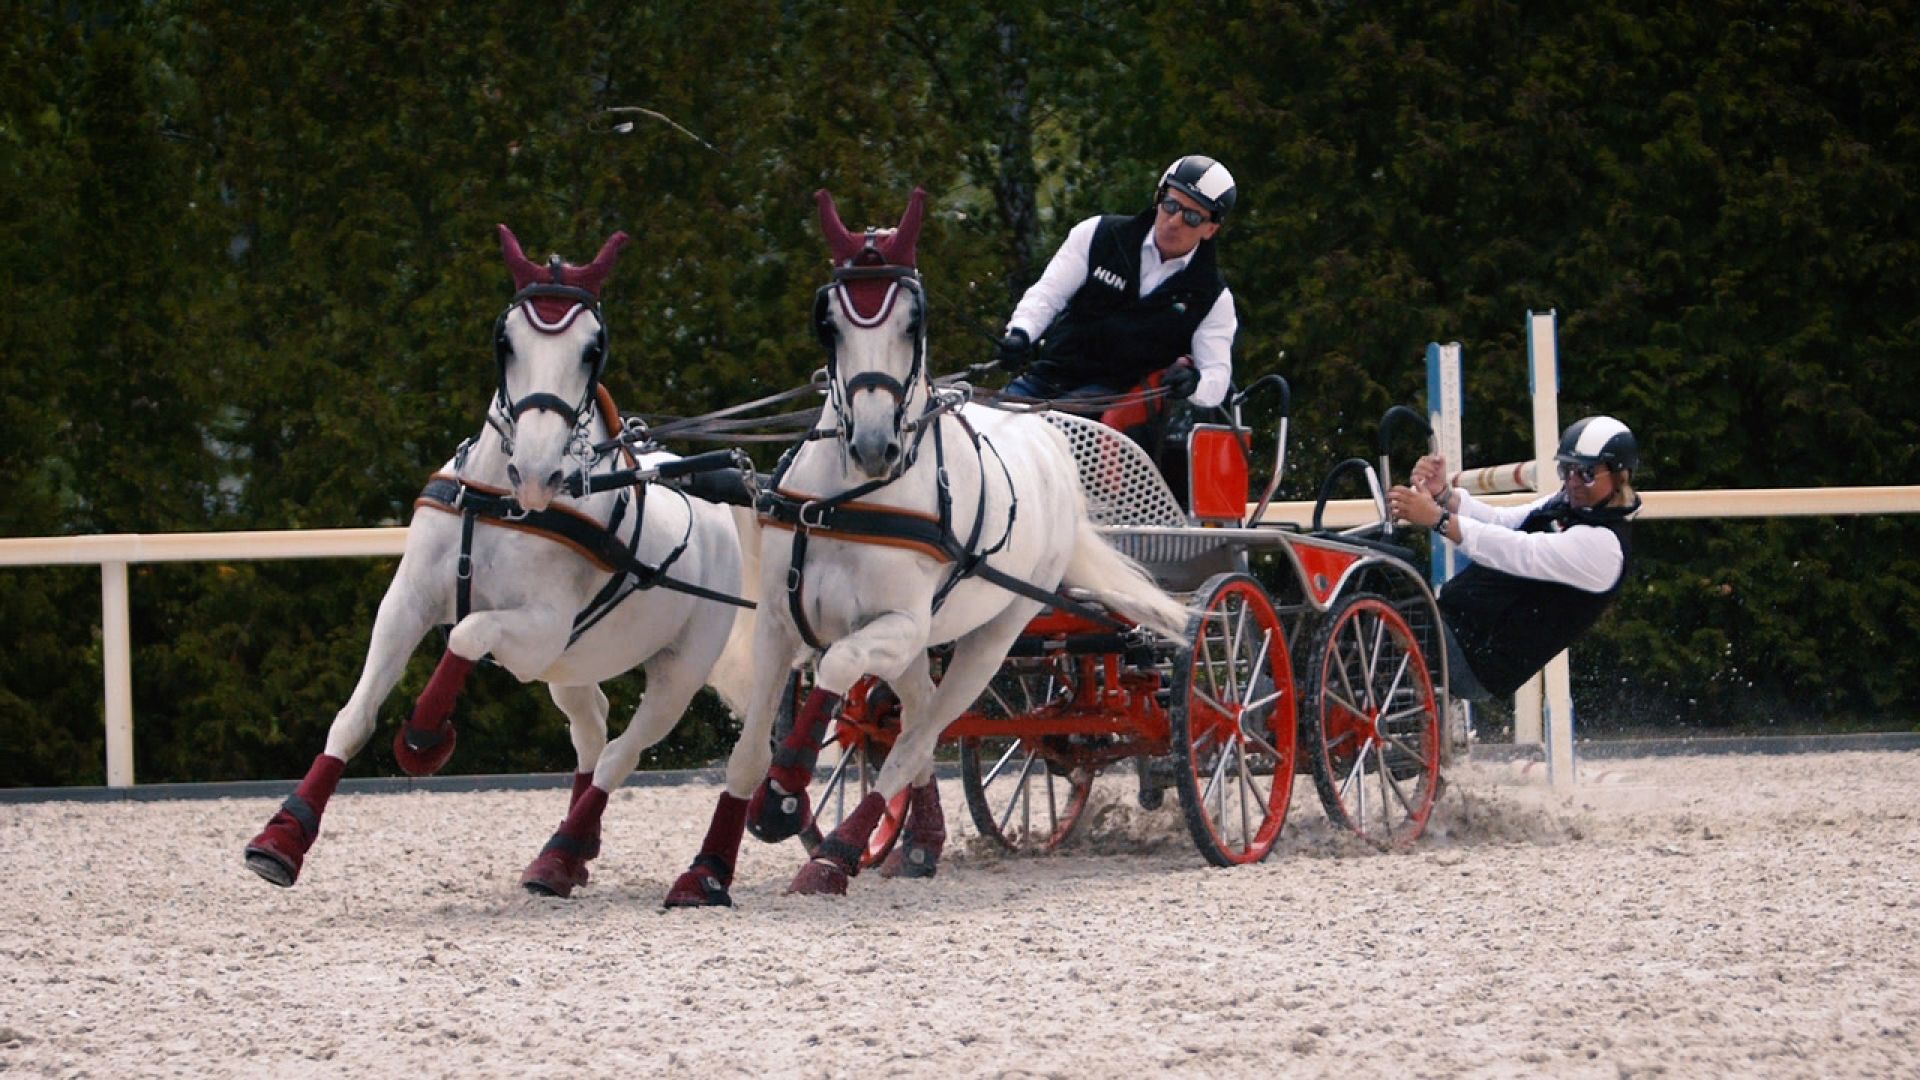 Vilmos Lázár's and Zoltán Lázár's achievements in carriage driving: Vilmos Lázár is 12 time two-in-hand carriage driving world champion and he is the Chairman of the Association of Hungarian Equestrian Sport. Zoltán Lázár is 9 time World Champion in carriage driving